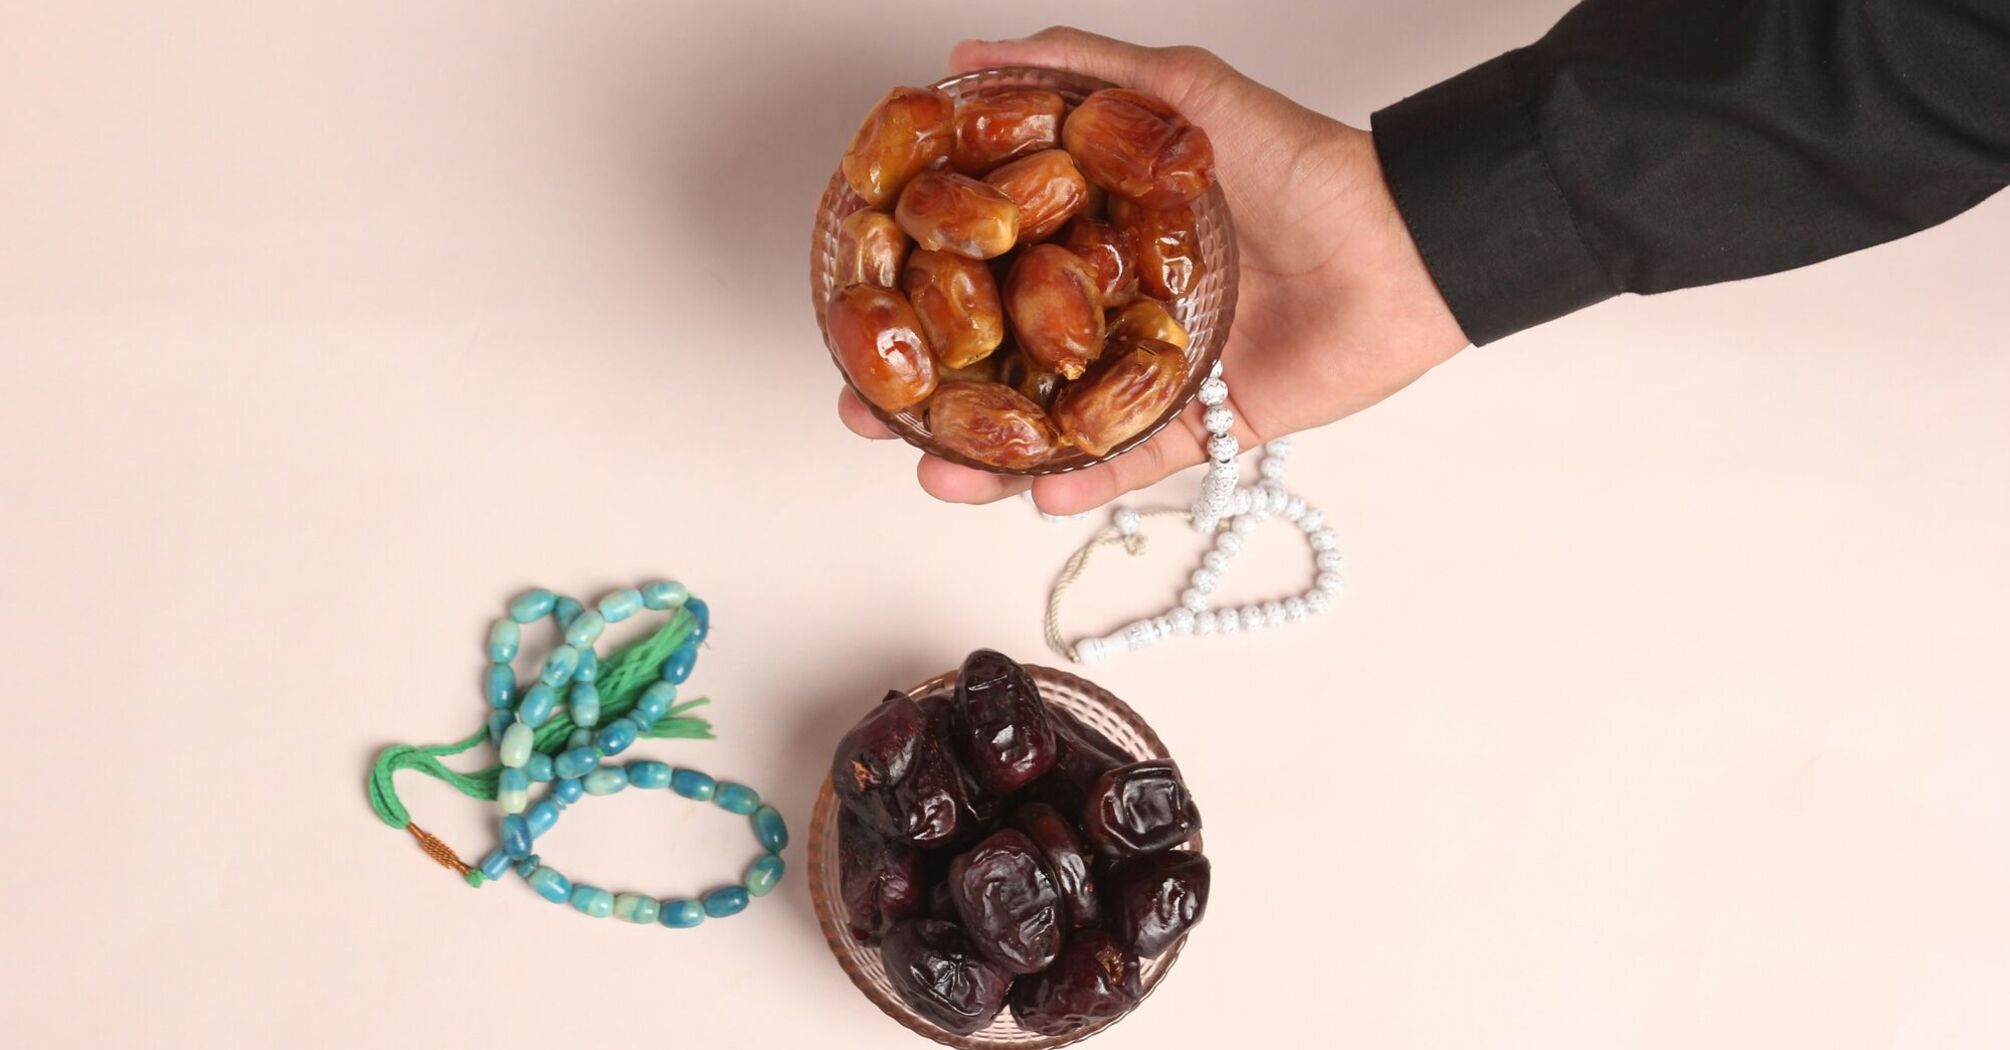 A hand holding a bowl of dates with prayer beads lying nearby on a plain surface 